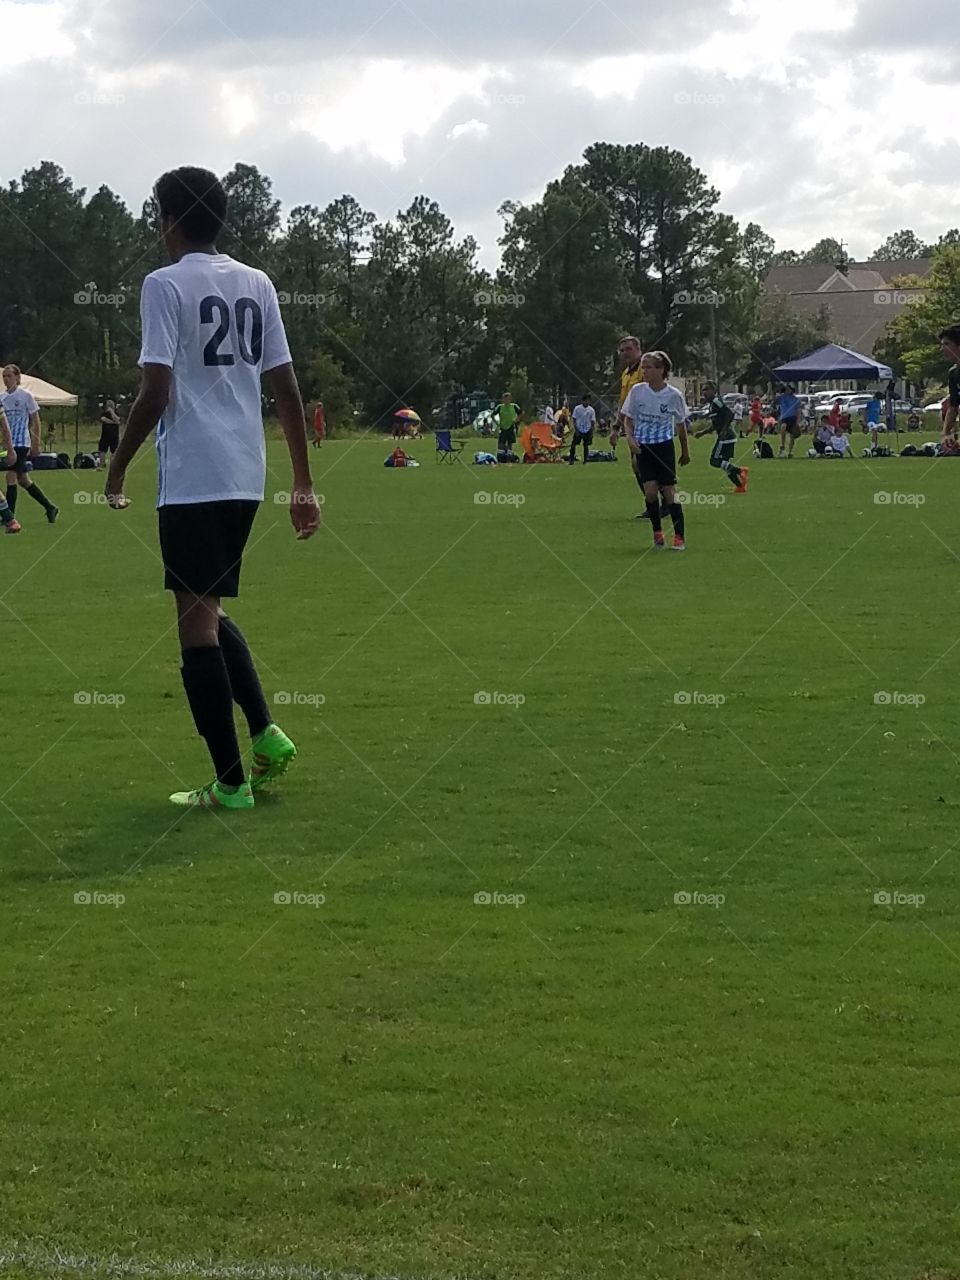 Youth Soccer Game